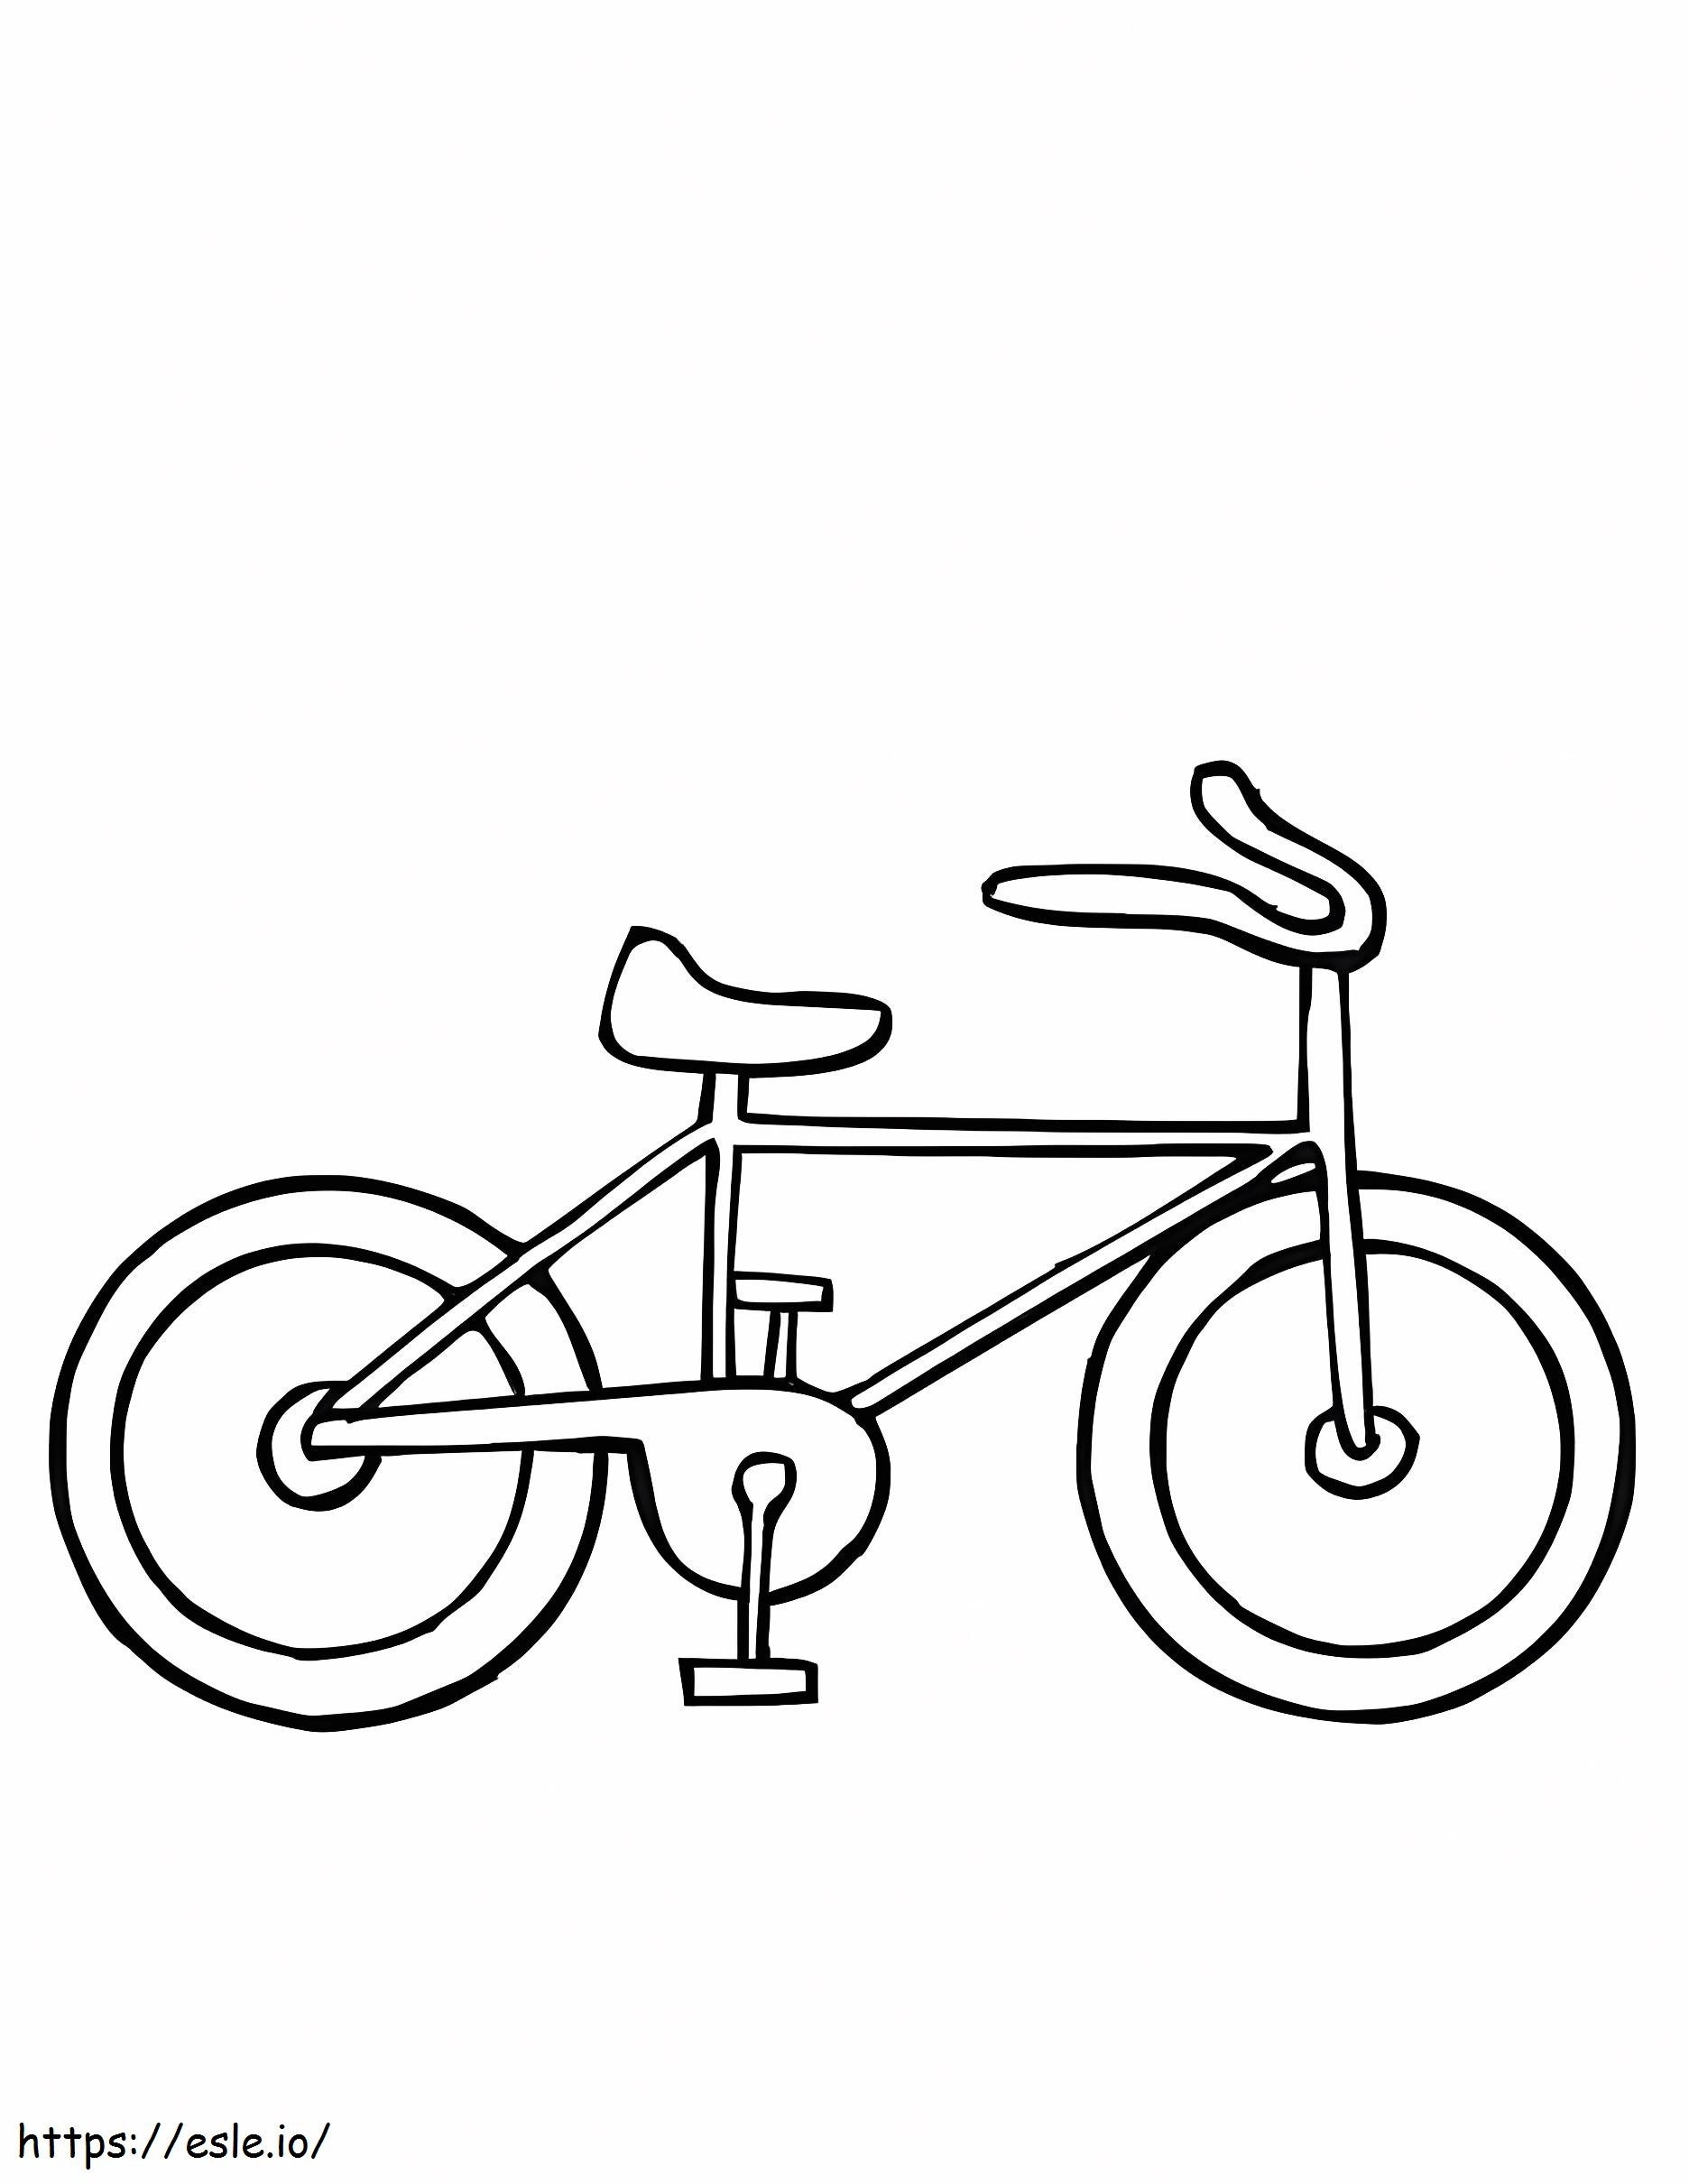 Great Bike coloring page